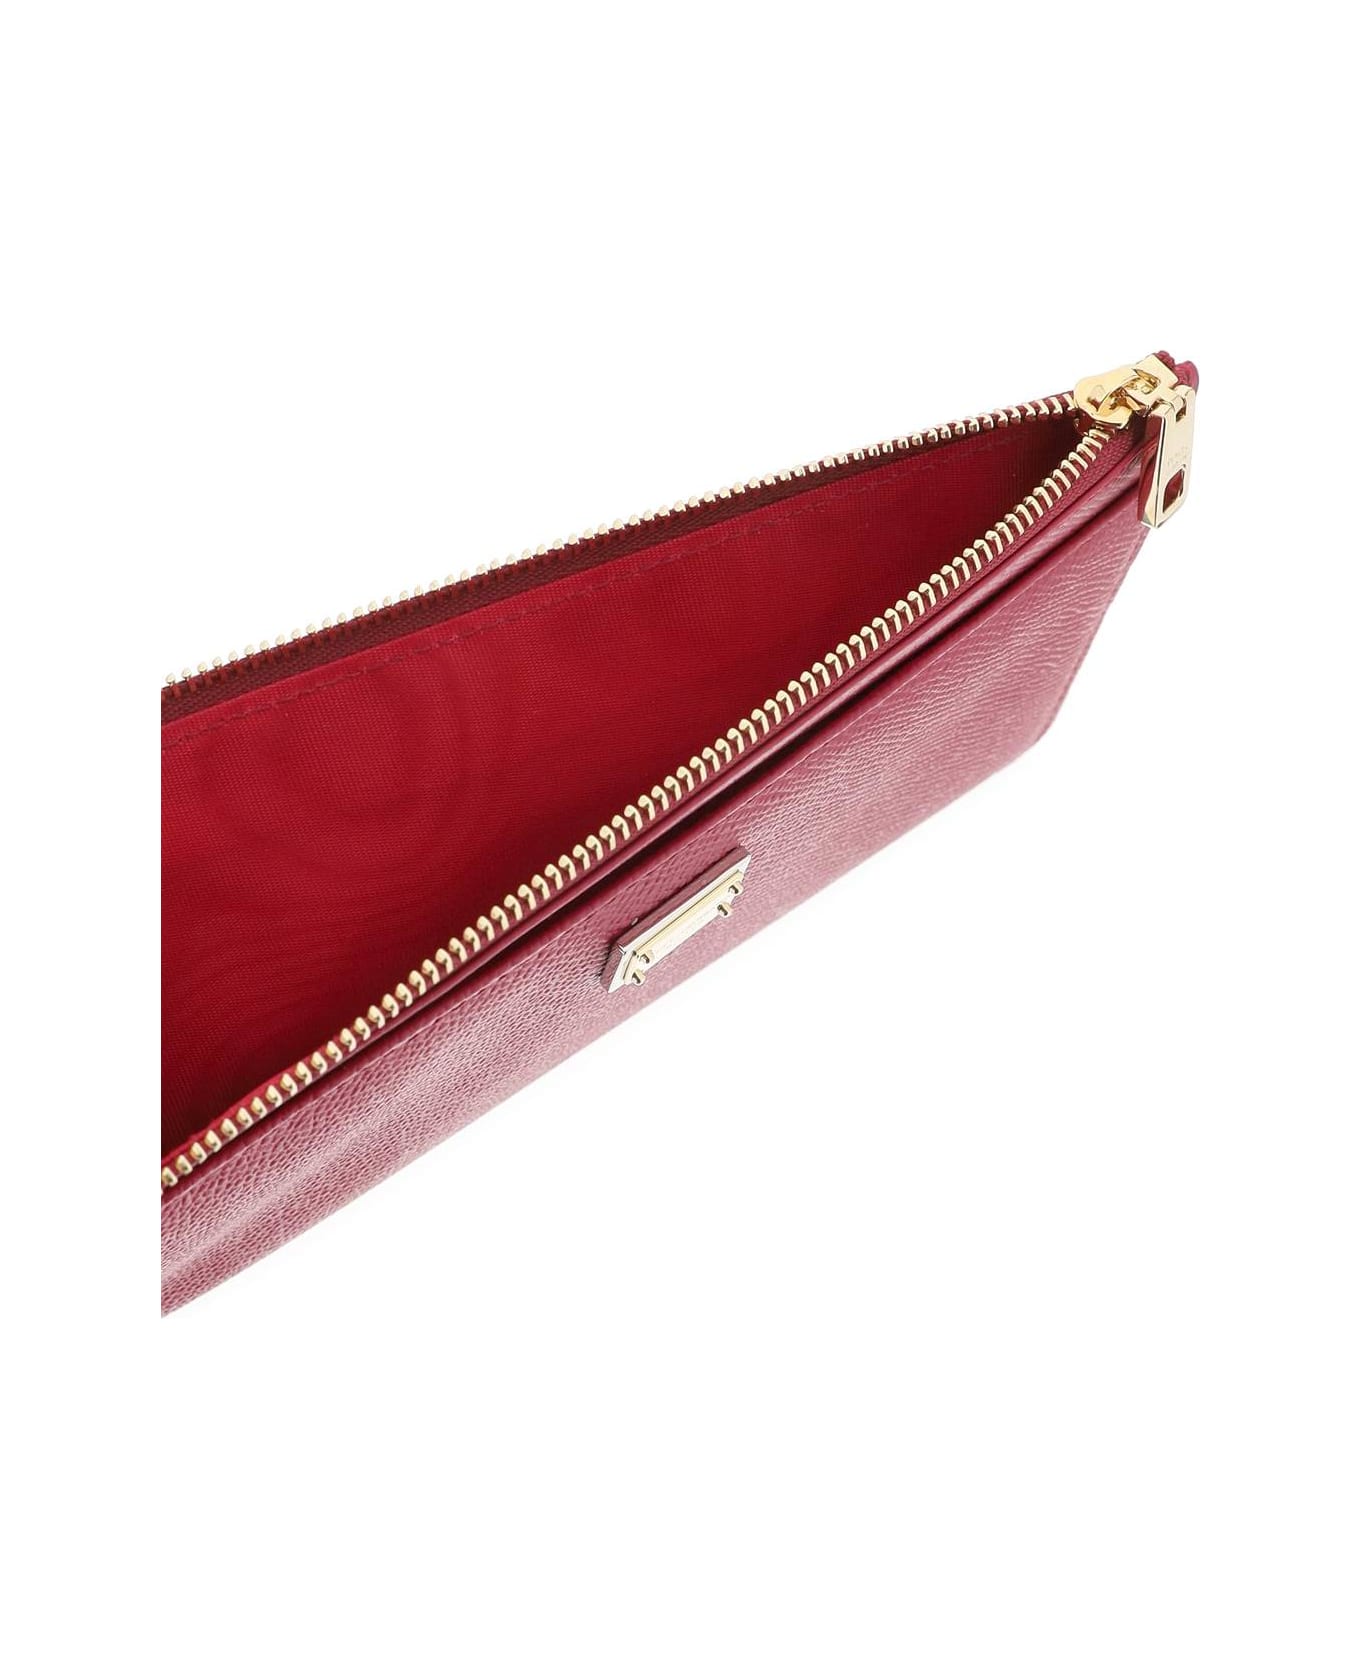 Dolce & Gabbana Cardholder Pouch In Dauphine Calfskin - CICLAMINO (Pink)